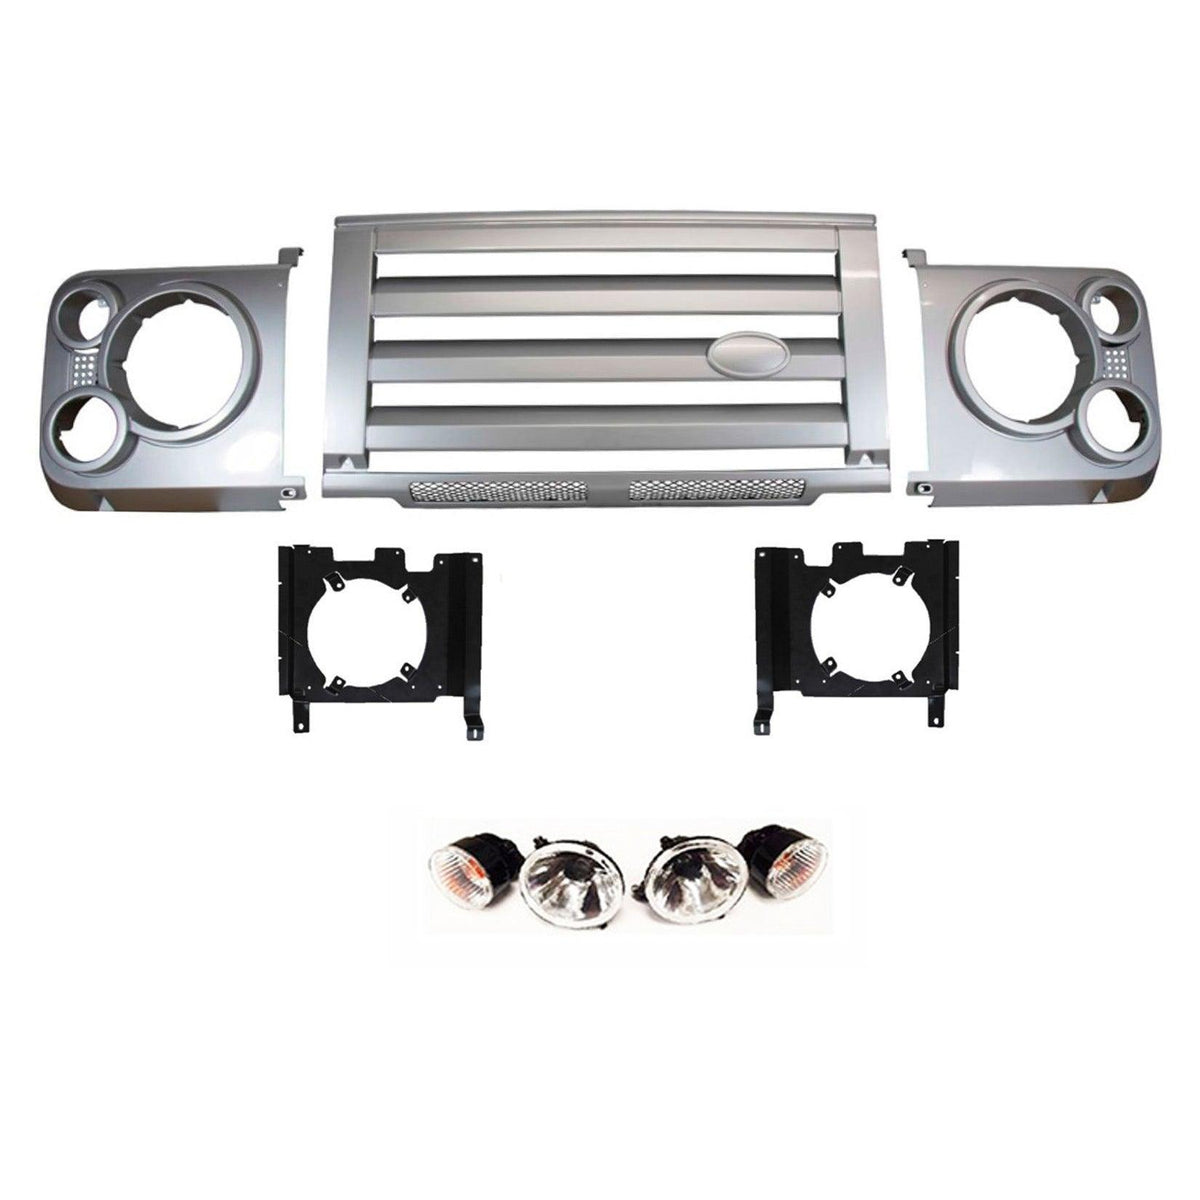 LAND ROVER DEFENDER 90 / 110 SVX UPGRAGE FRONT GRILL KIT - SILVER Land Rover Accessories - Storm Xccessories2